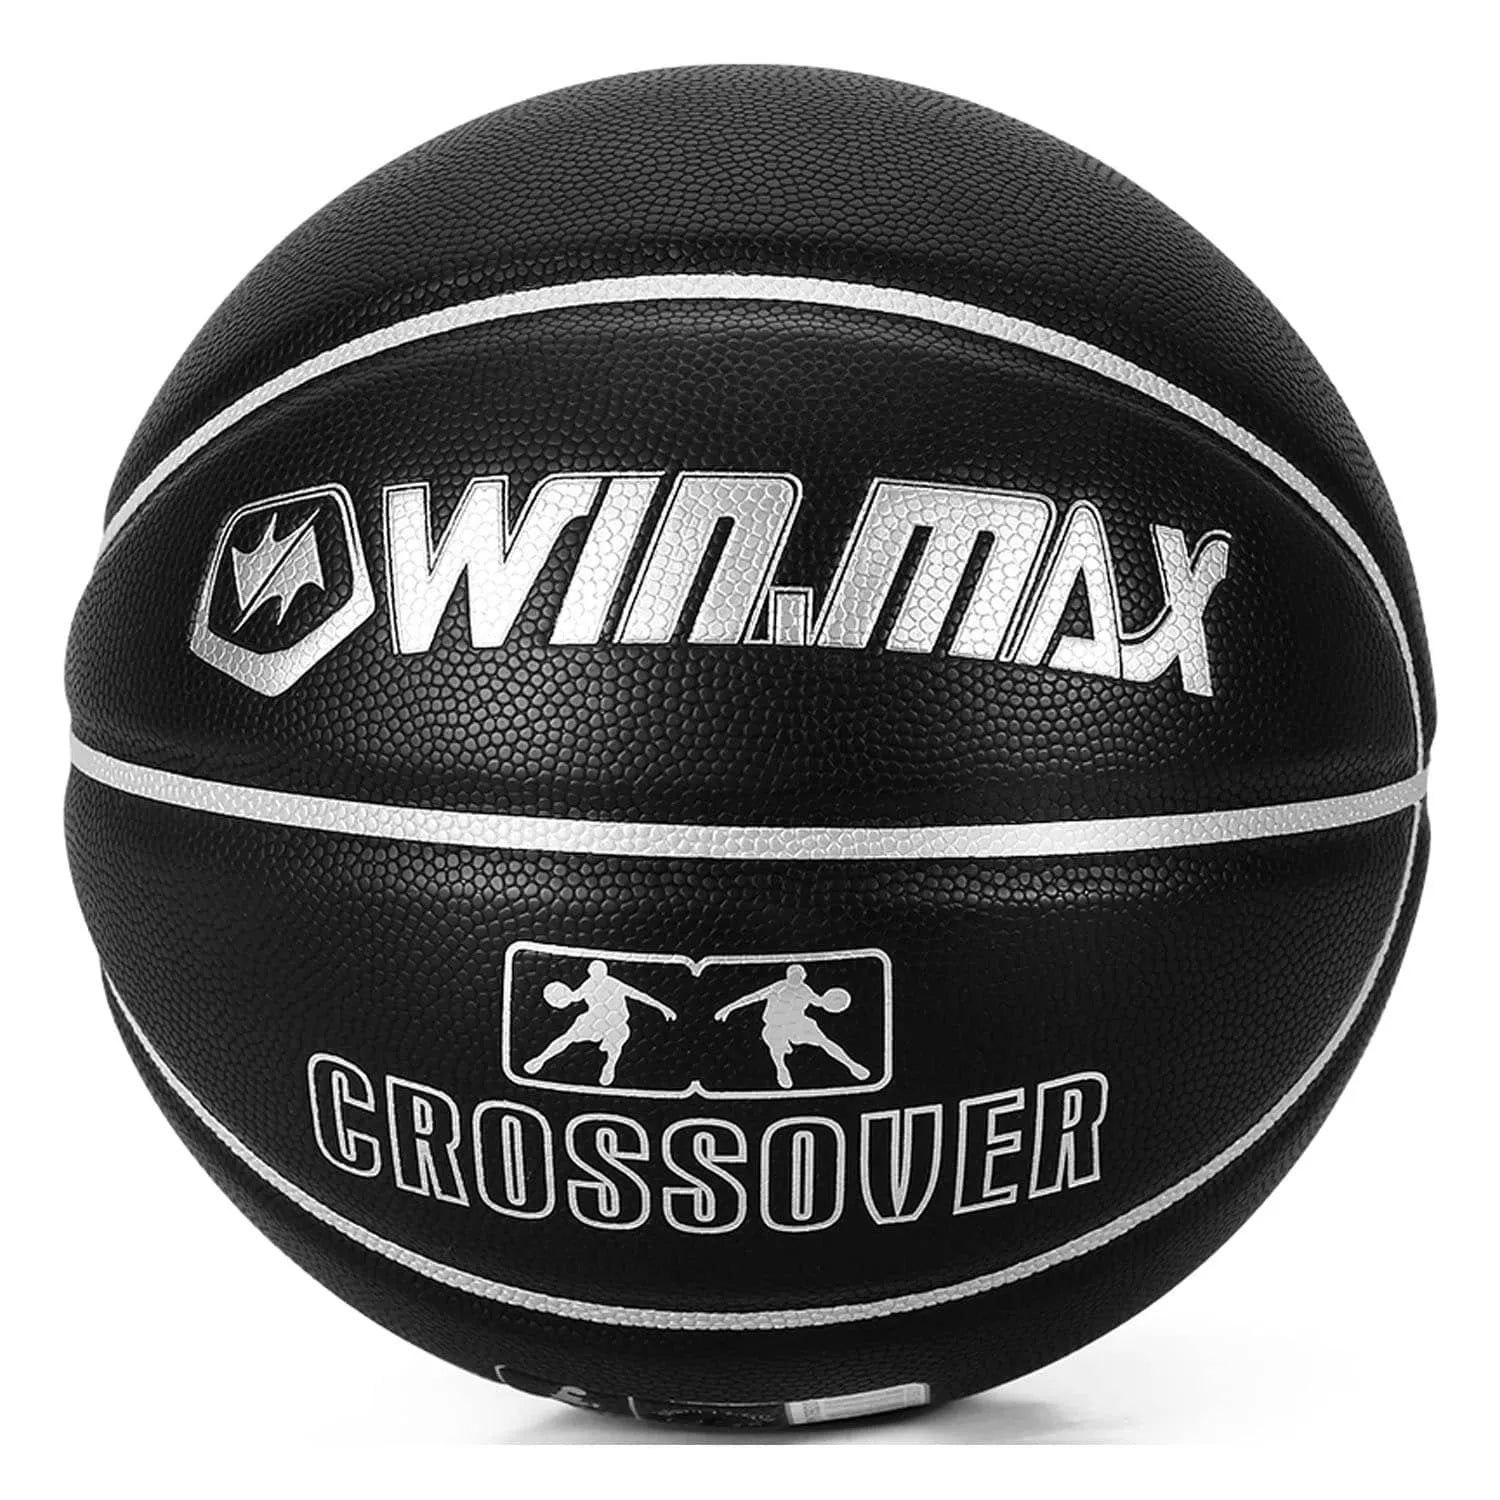 Winmax Basketball Black with Silver Design Front View